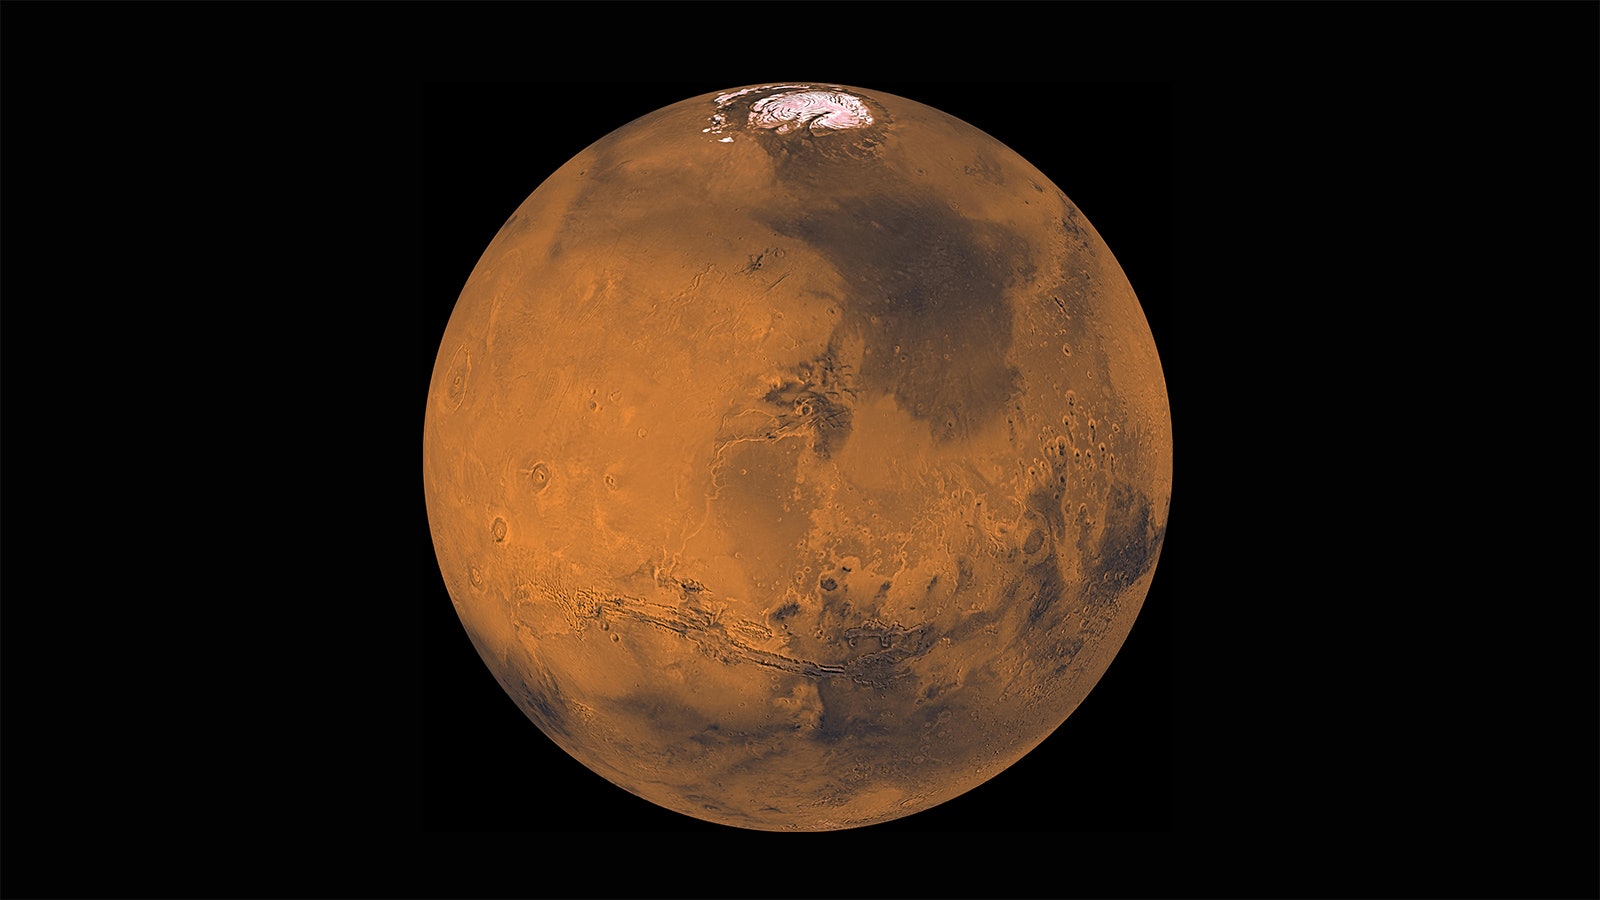 Mars 2020 Remarkable Maps Are Guiding The Mission Icoreign Com - mmp room gamepass roblox